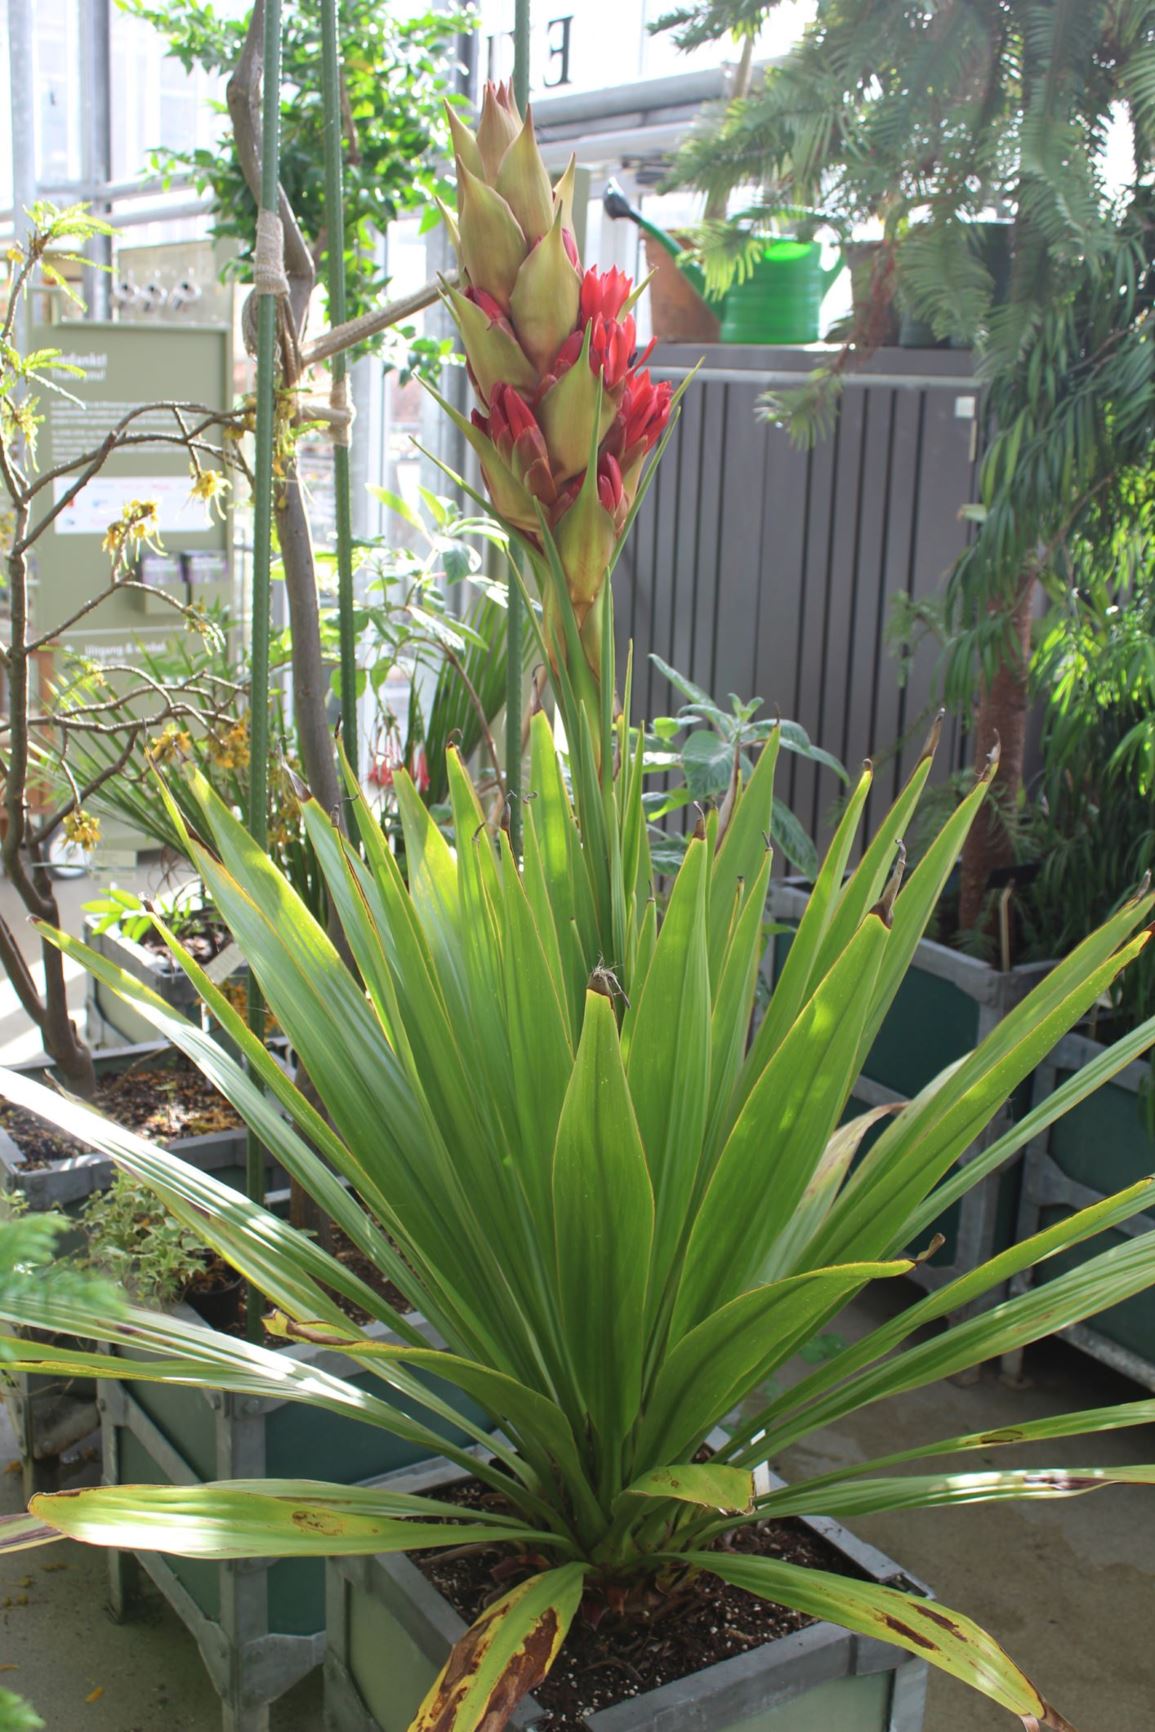 Doryanthes palmeri - Giant spear lily, Queensland palm lily